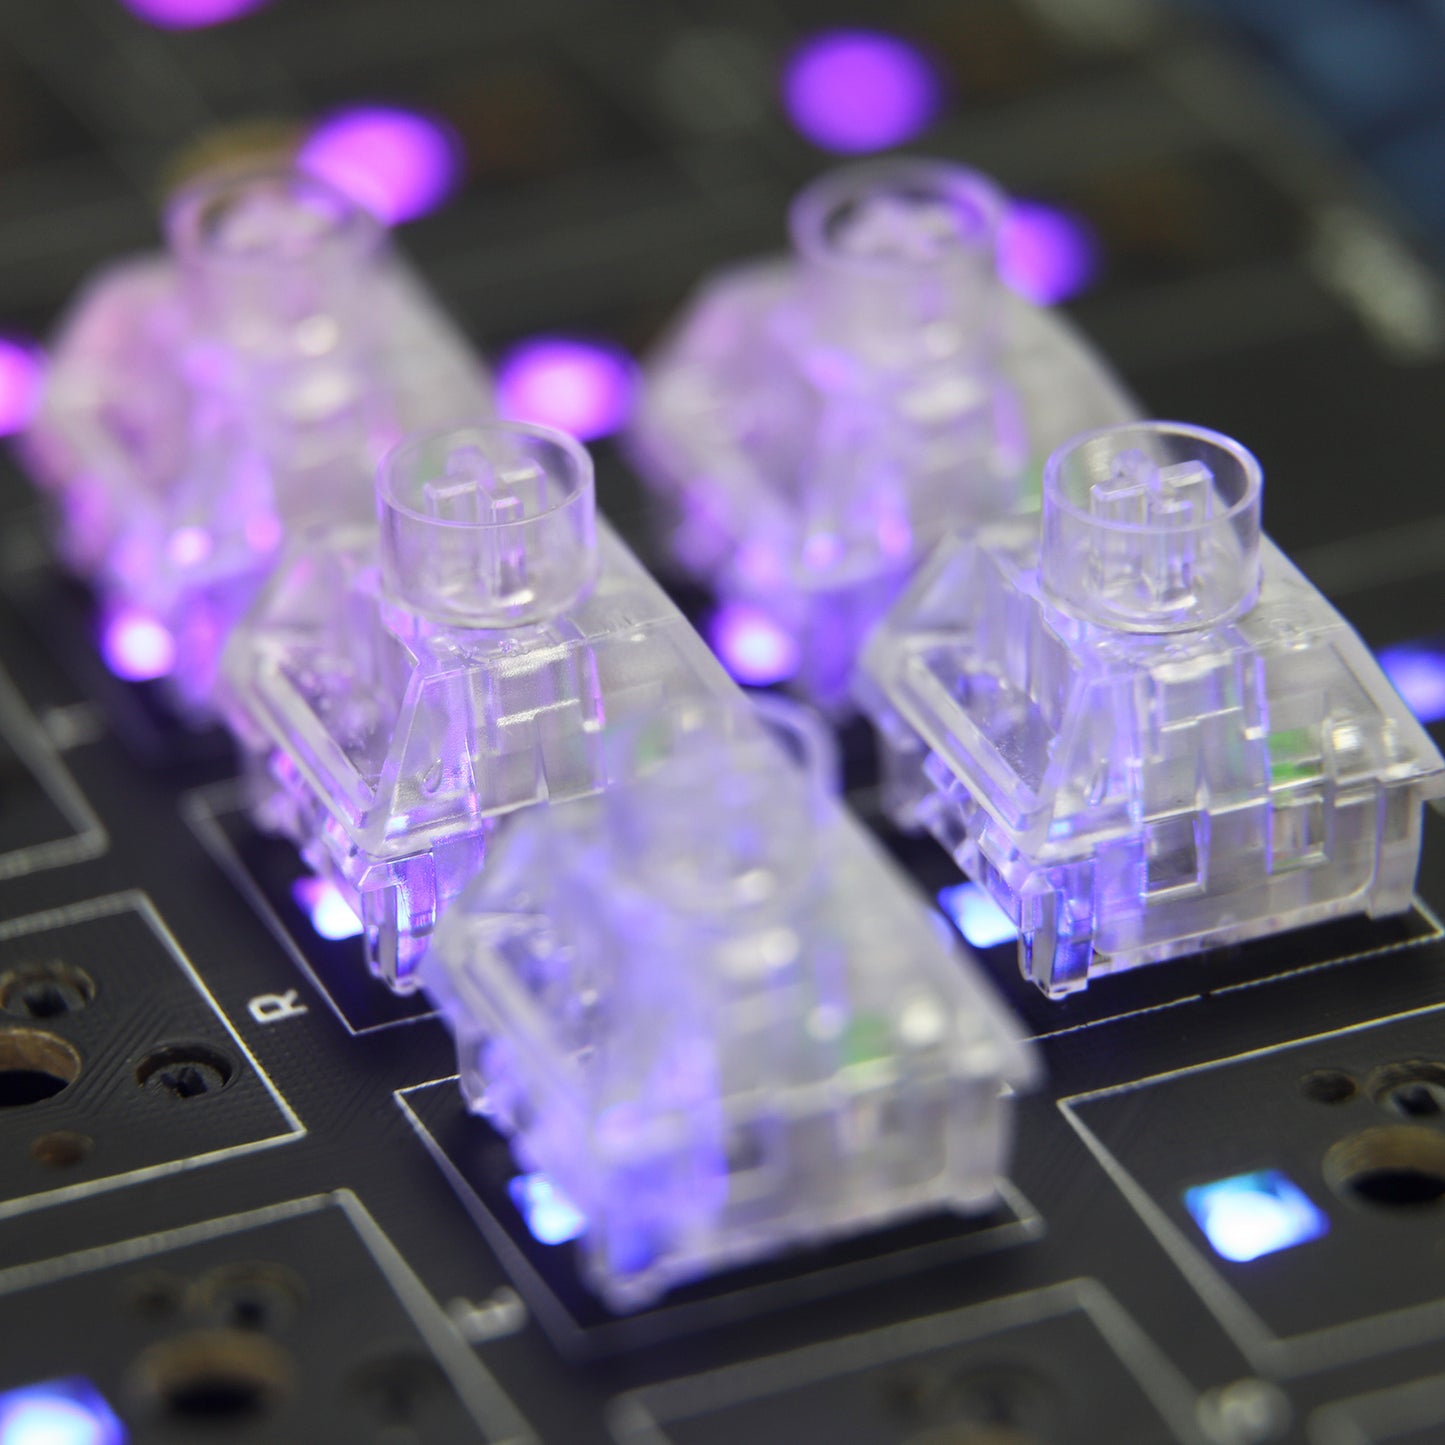 Kailh Box Jellyfish Switches(RGB SMD Linear 60g/5pin Self lubricating Transparent)